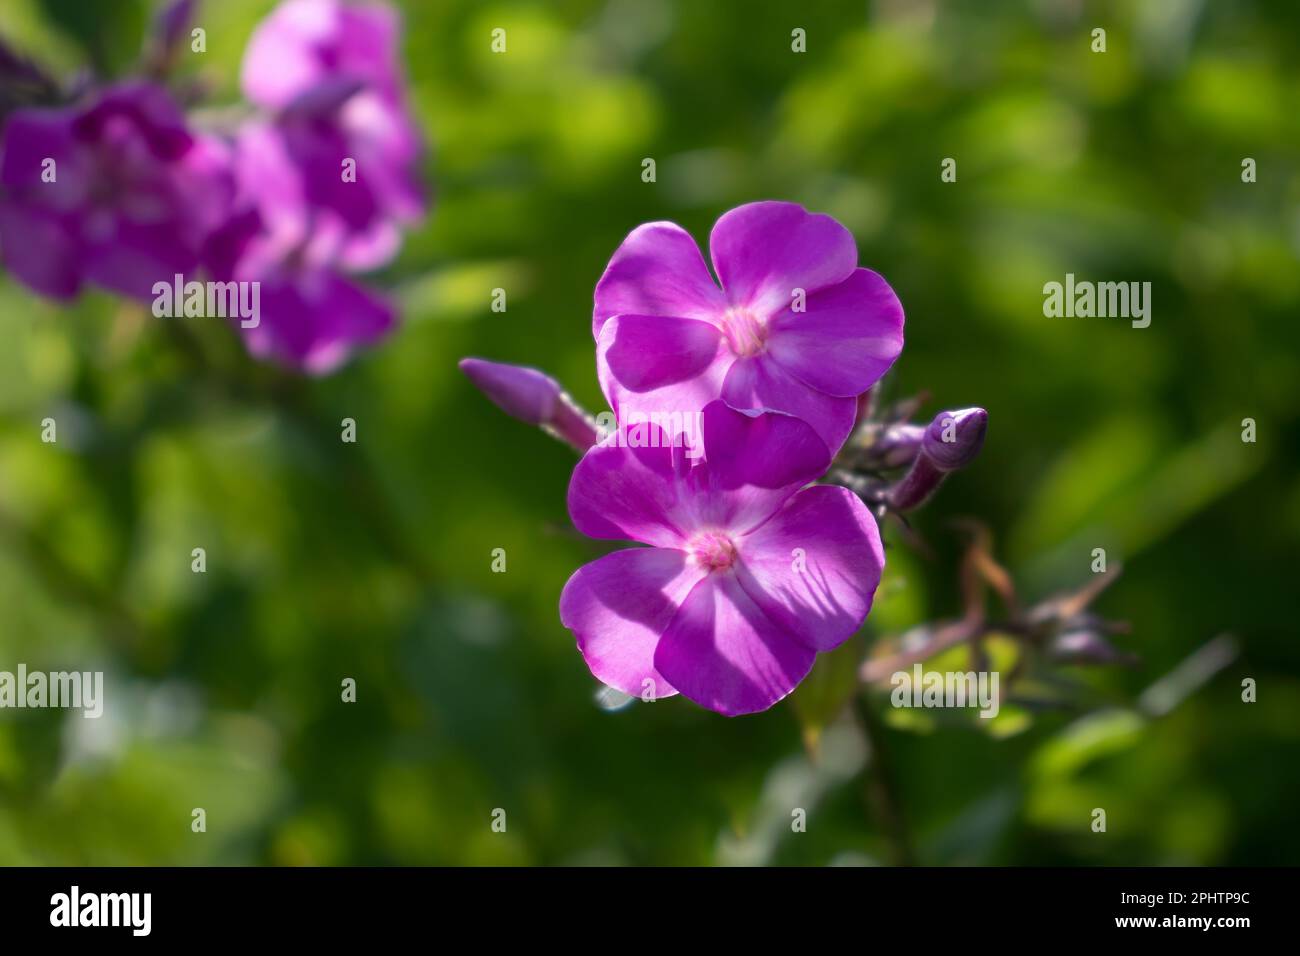 Pink phlox on a background of green foliage. Stock Photo